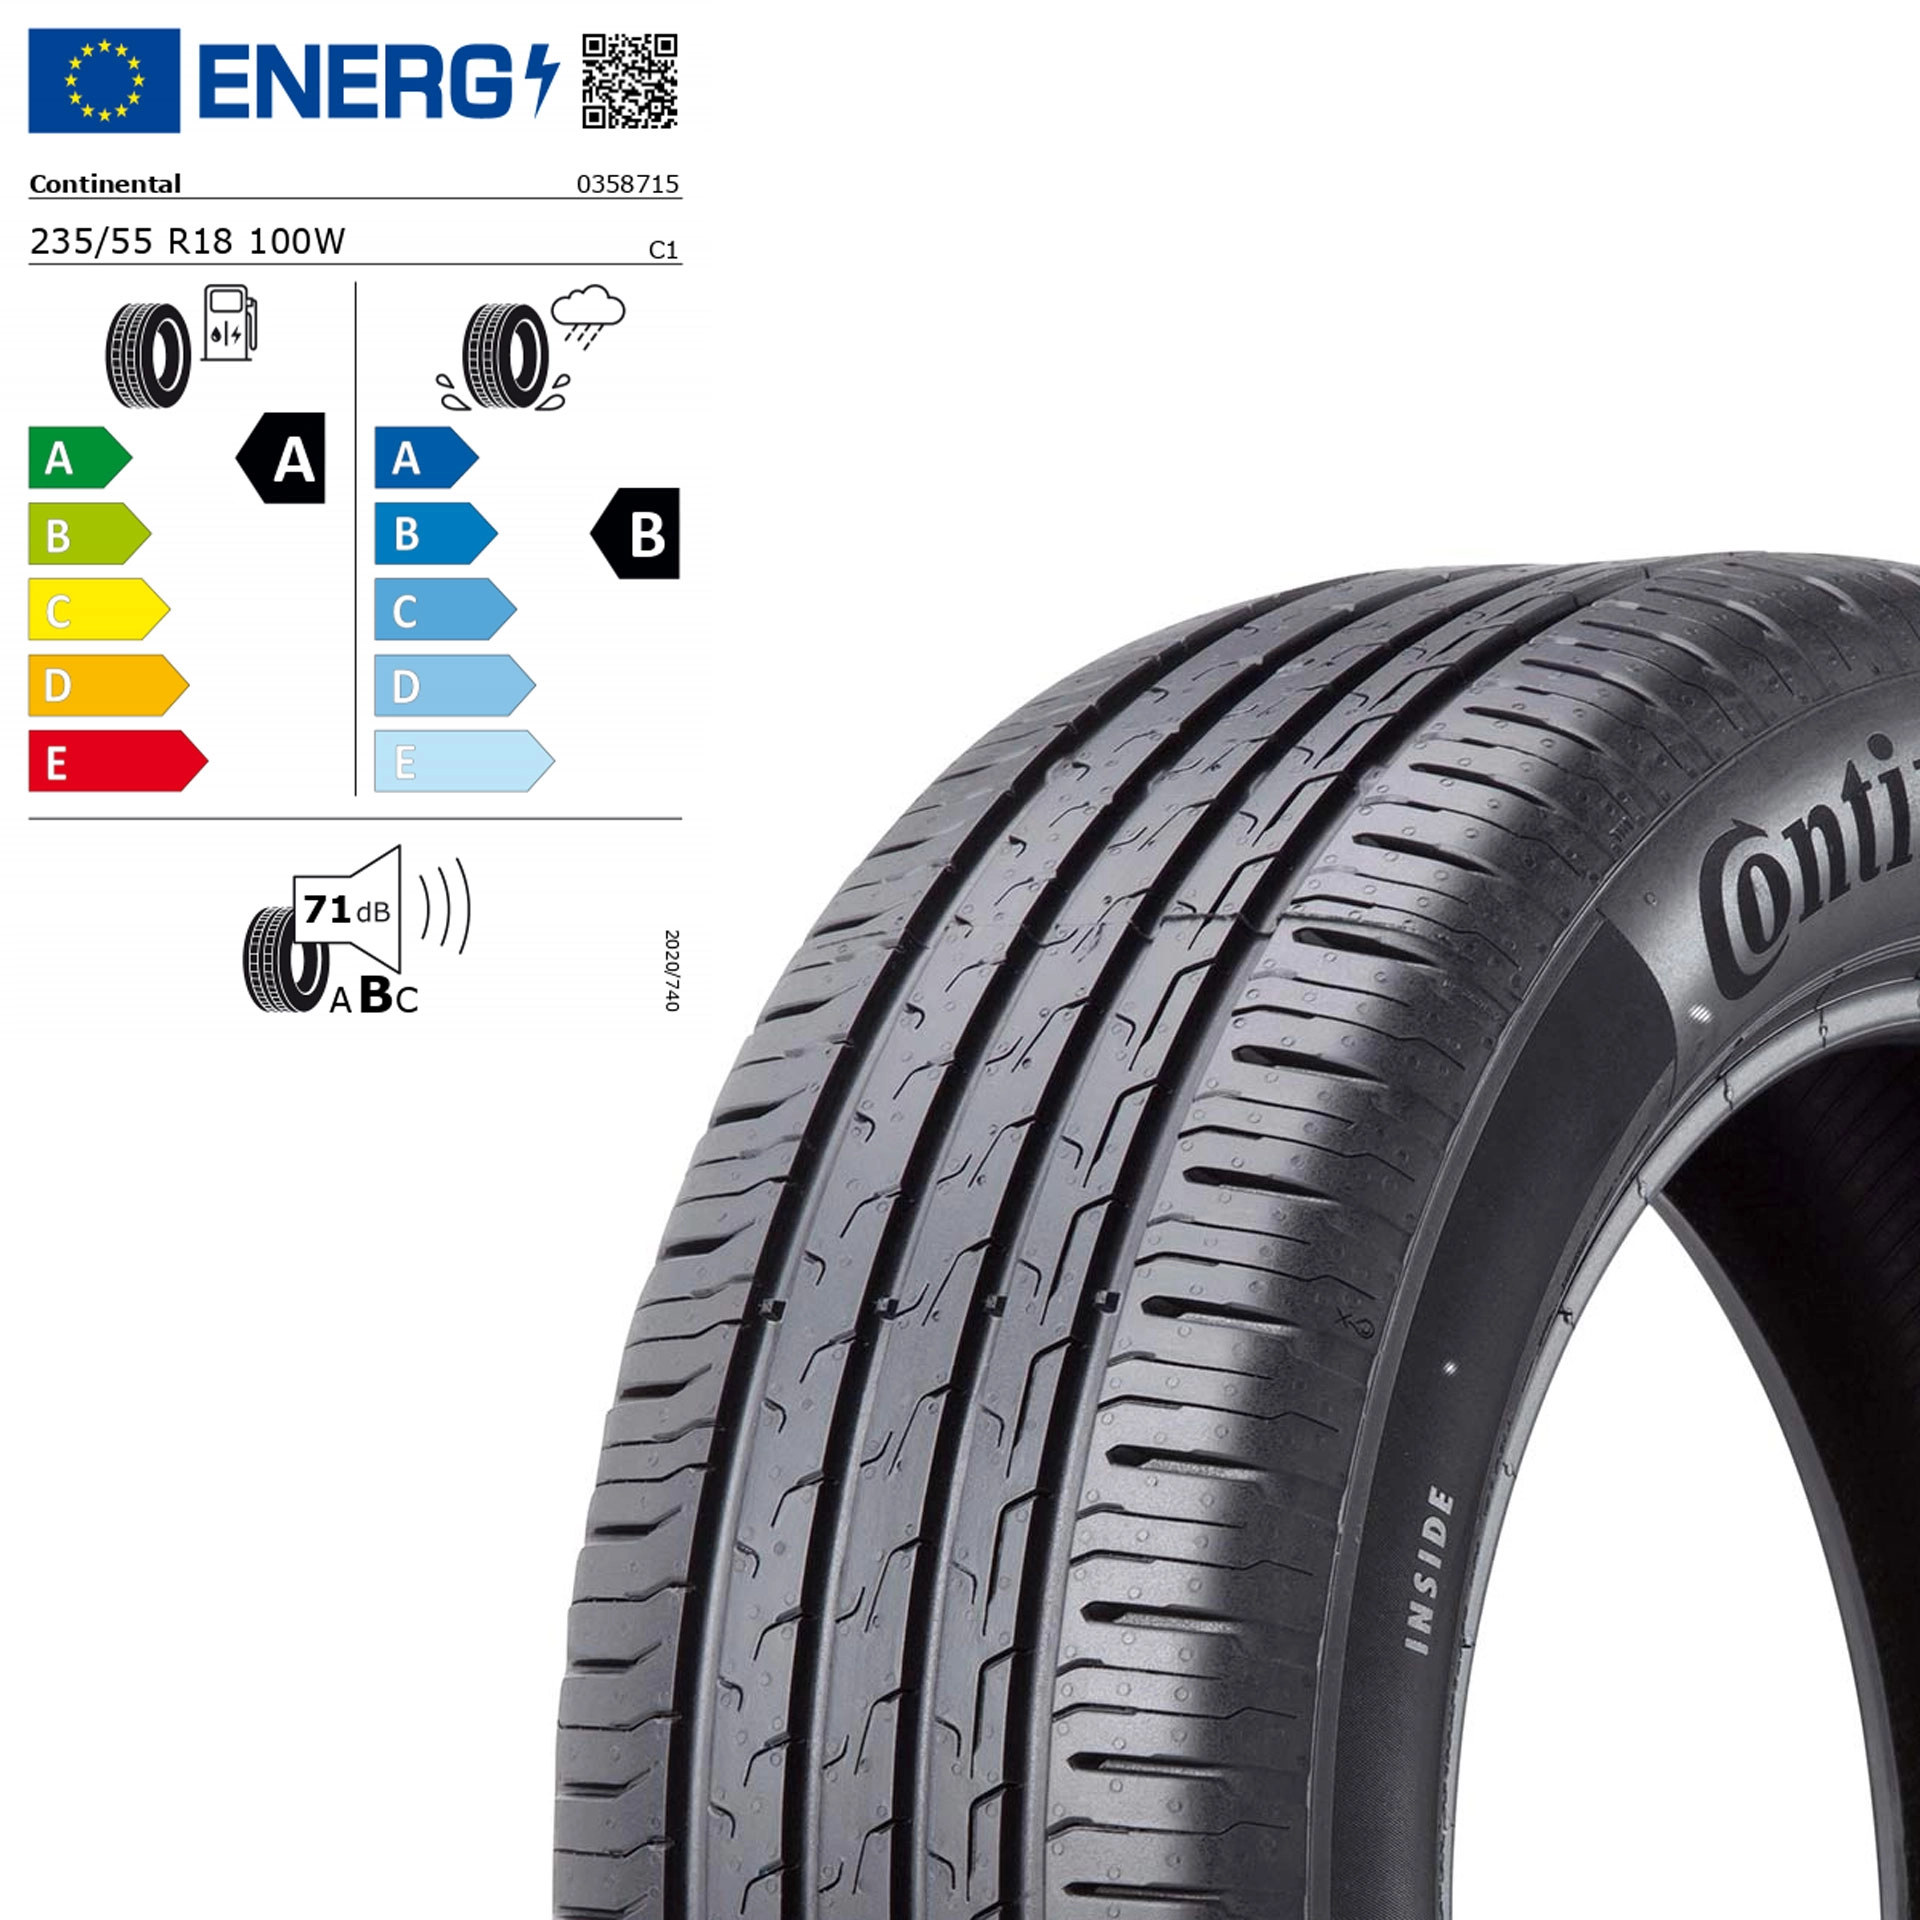 235/55 R18 100W Continental EcoContact 6 MO Sommerreifen Q44001111288A